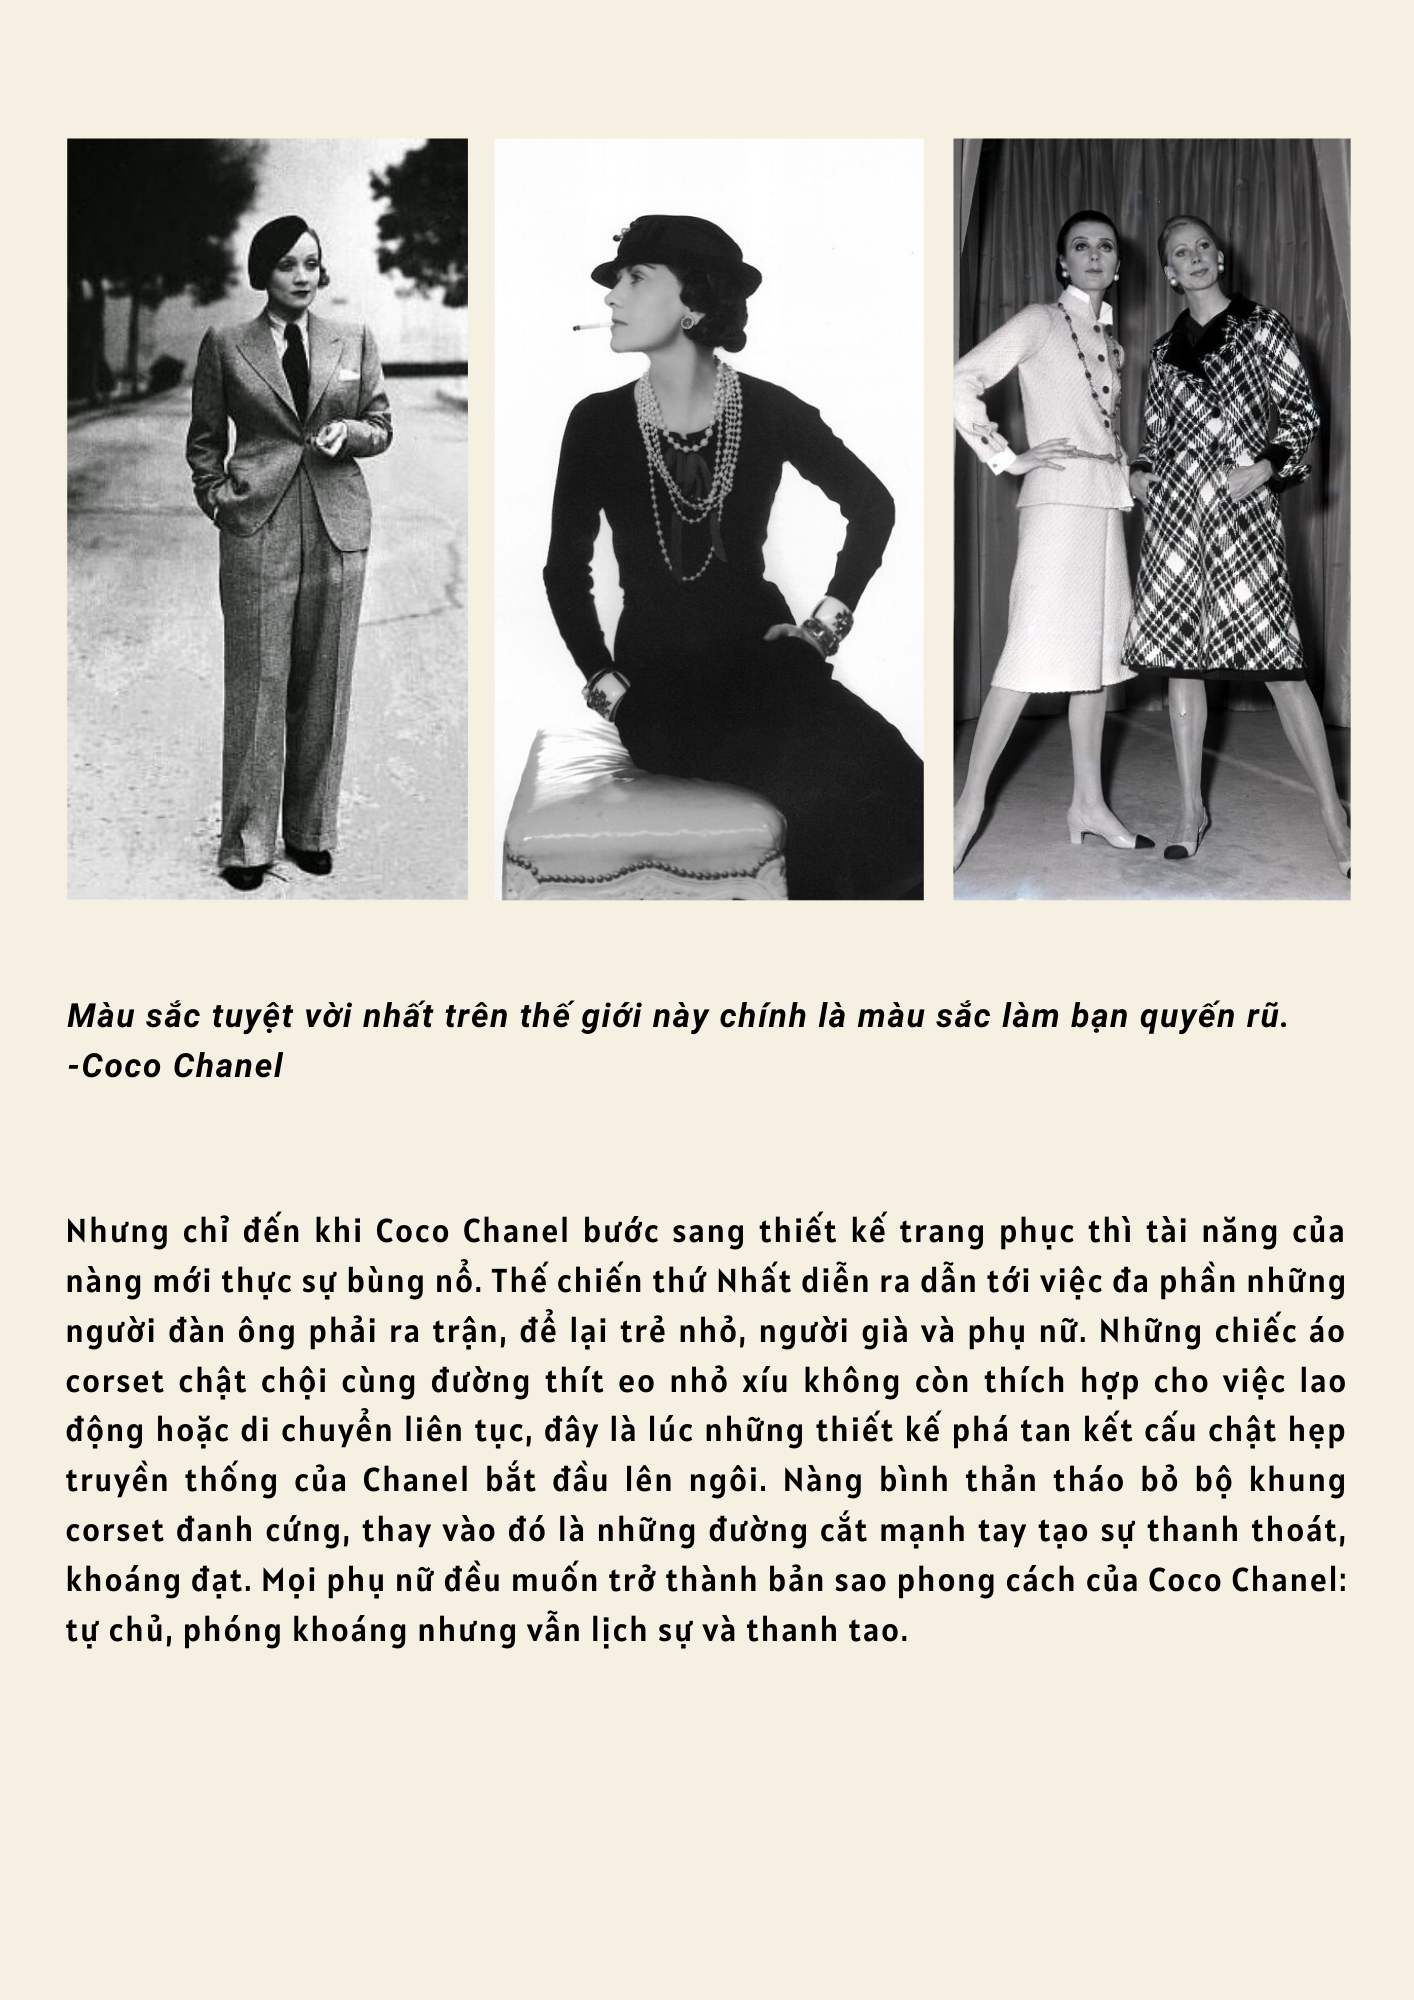 1/coco-chanel-nguoi-dinh-hinh-lai-thoi-trang-the-gioi-4_04072020110332289_33imvb2z.zfh.png